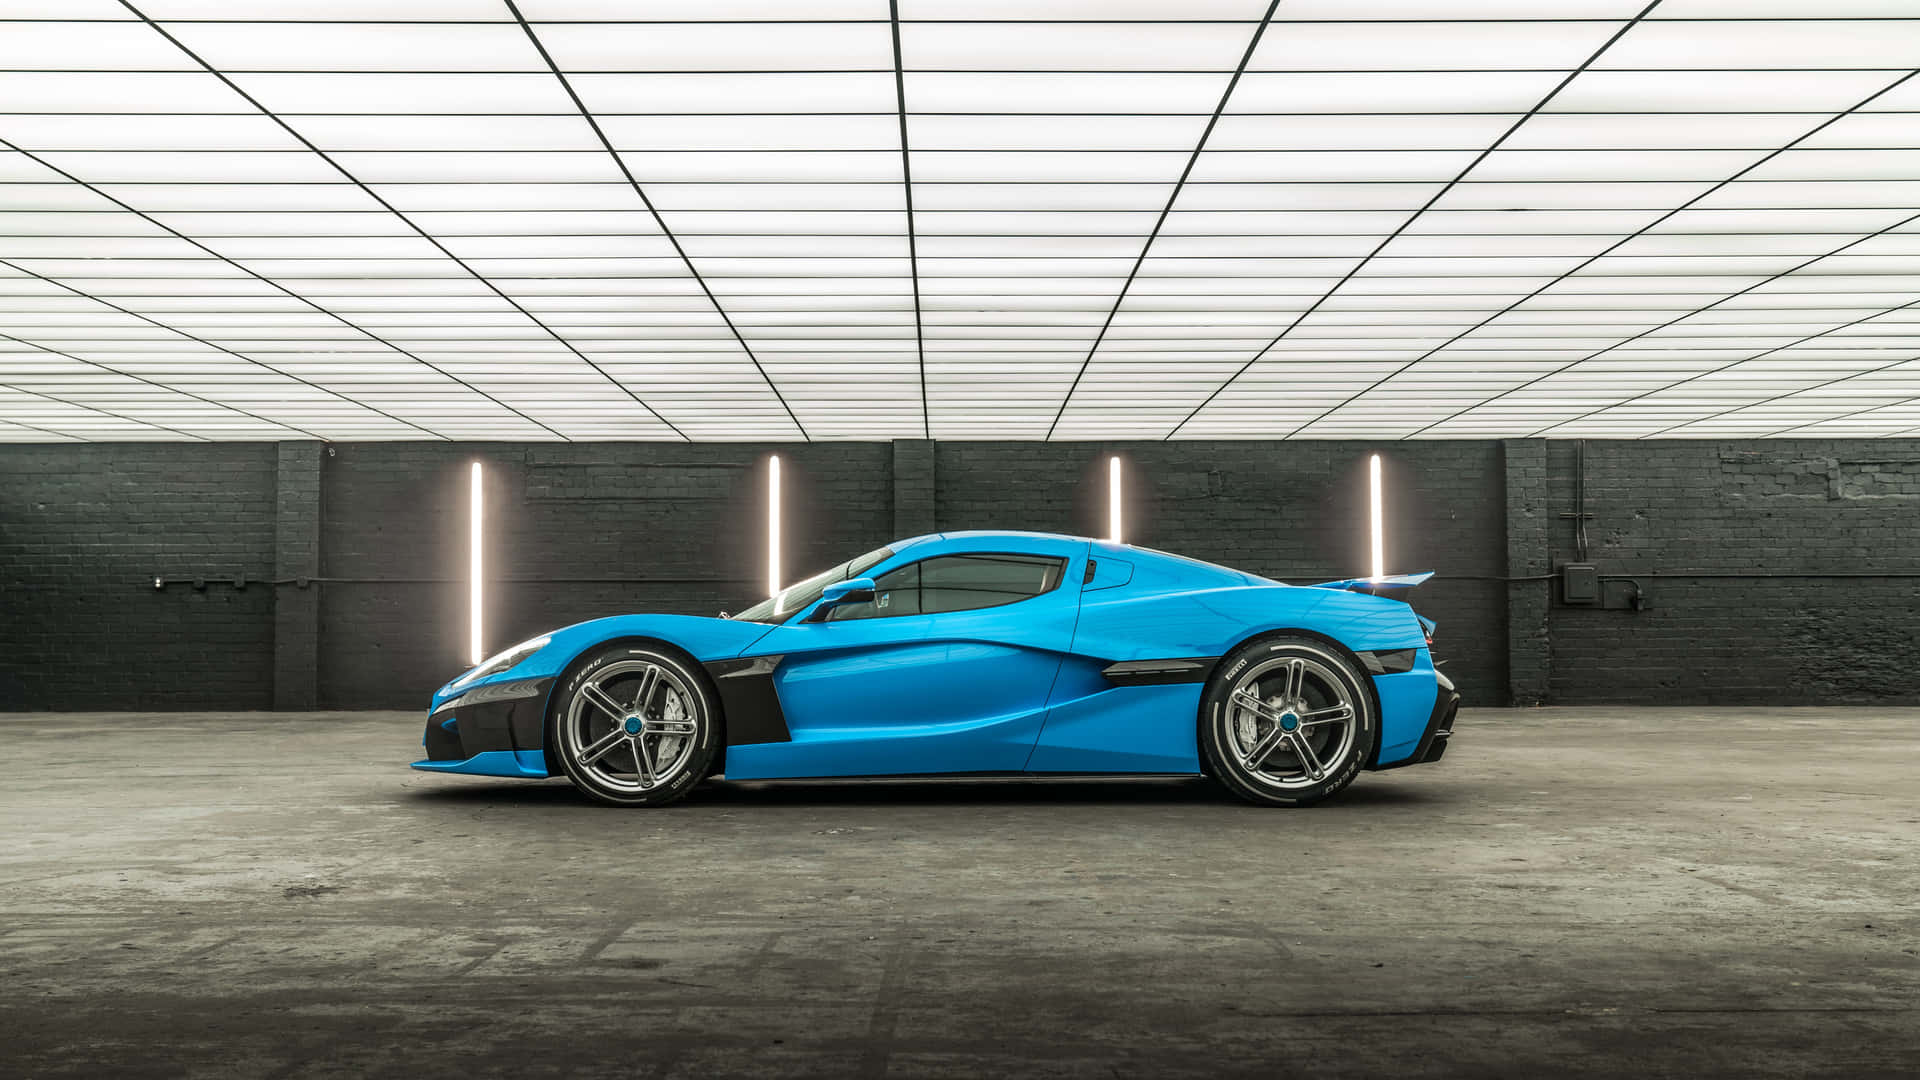 Rimac Automobili's electric hypercar in action Wallpaper